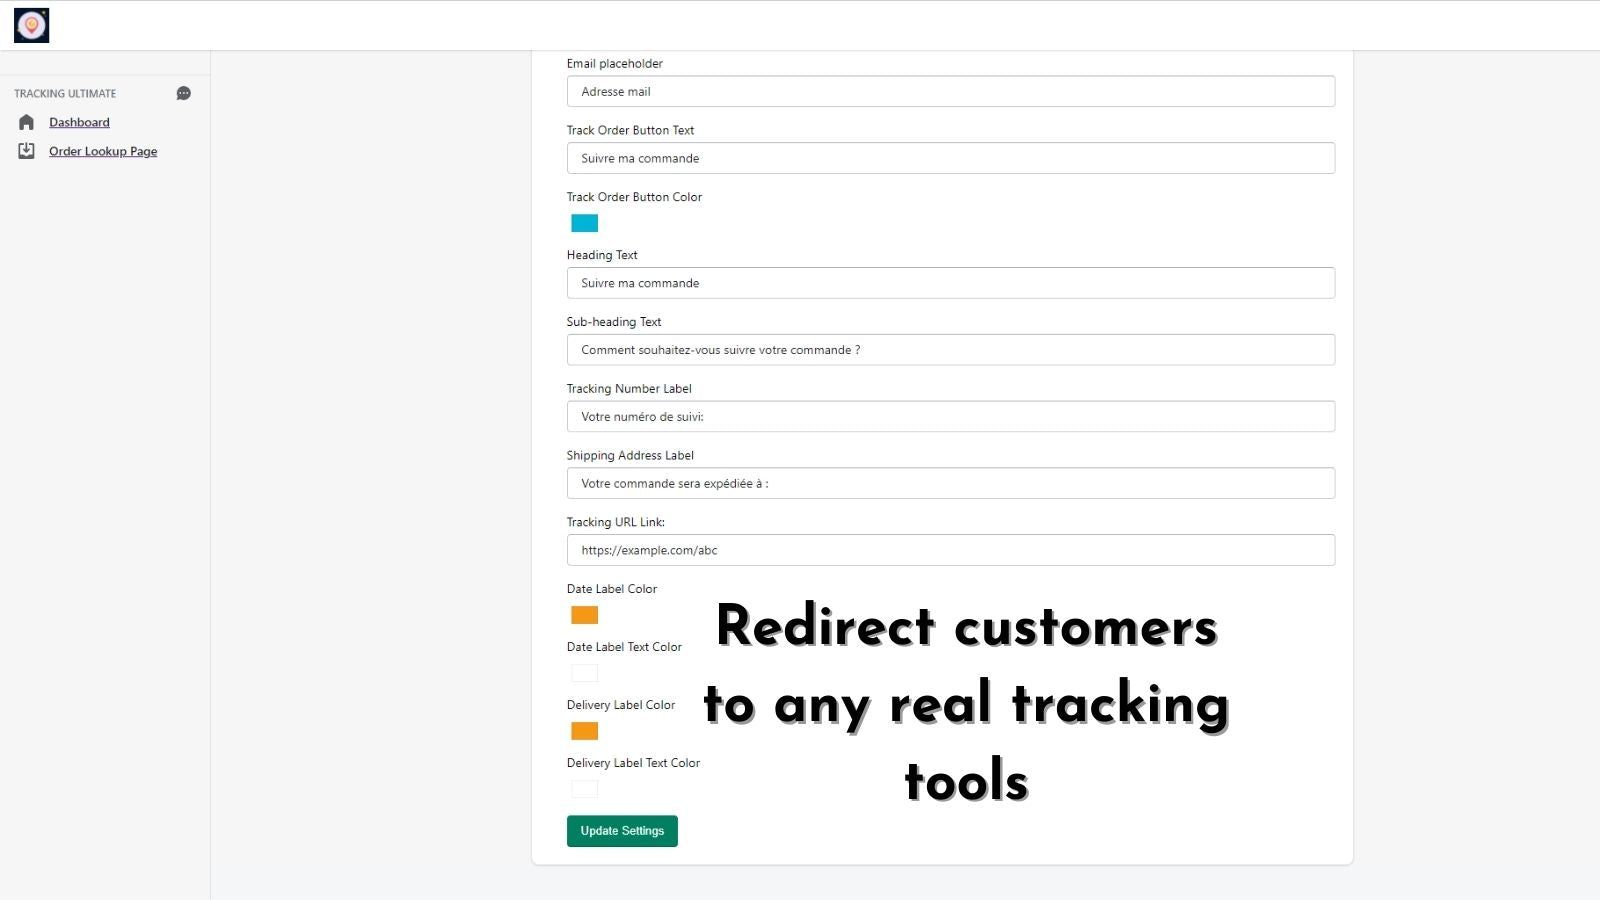 Redirect customers to any real tracking tools